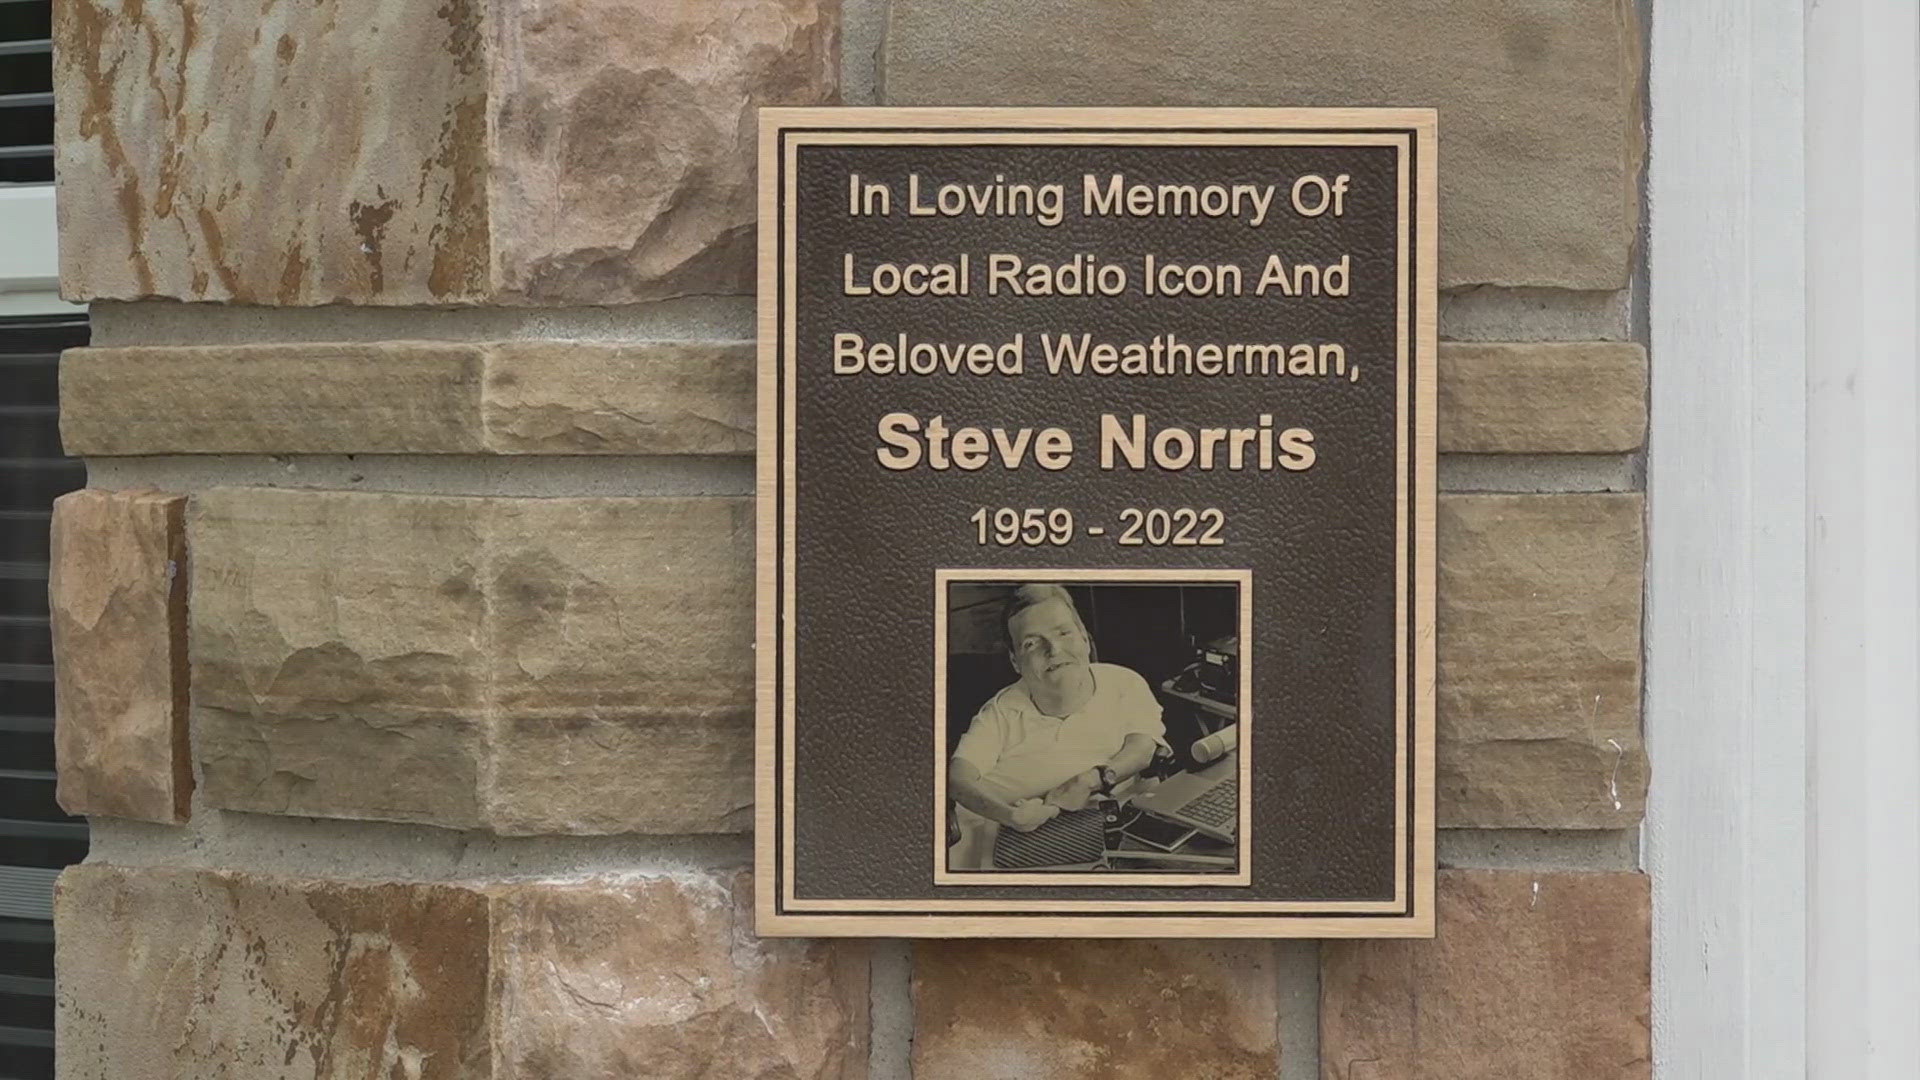 Steve passed away in 2022. On Friday, the community honored his memory with a plaque on his former workspace in downtown Crossville.